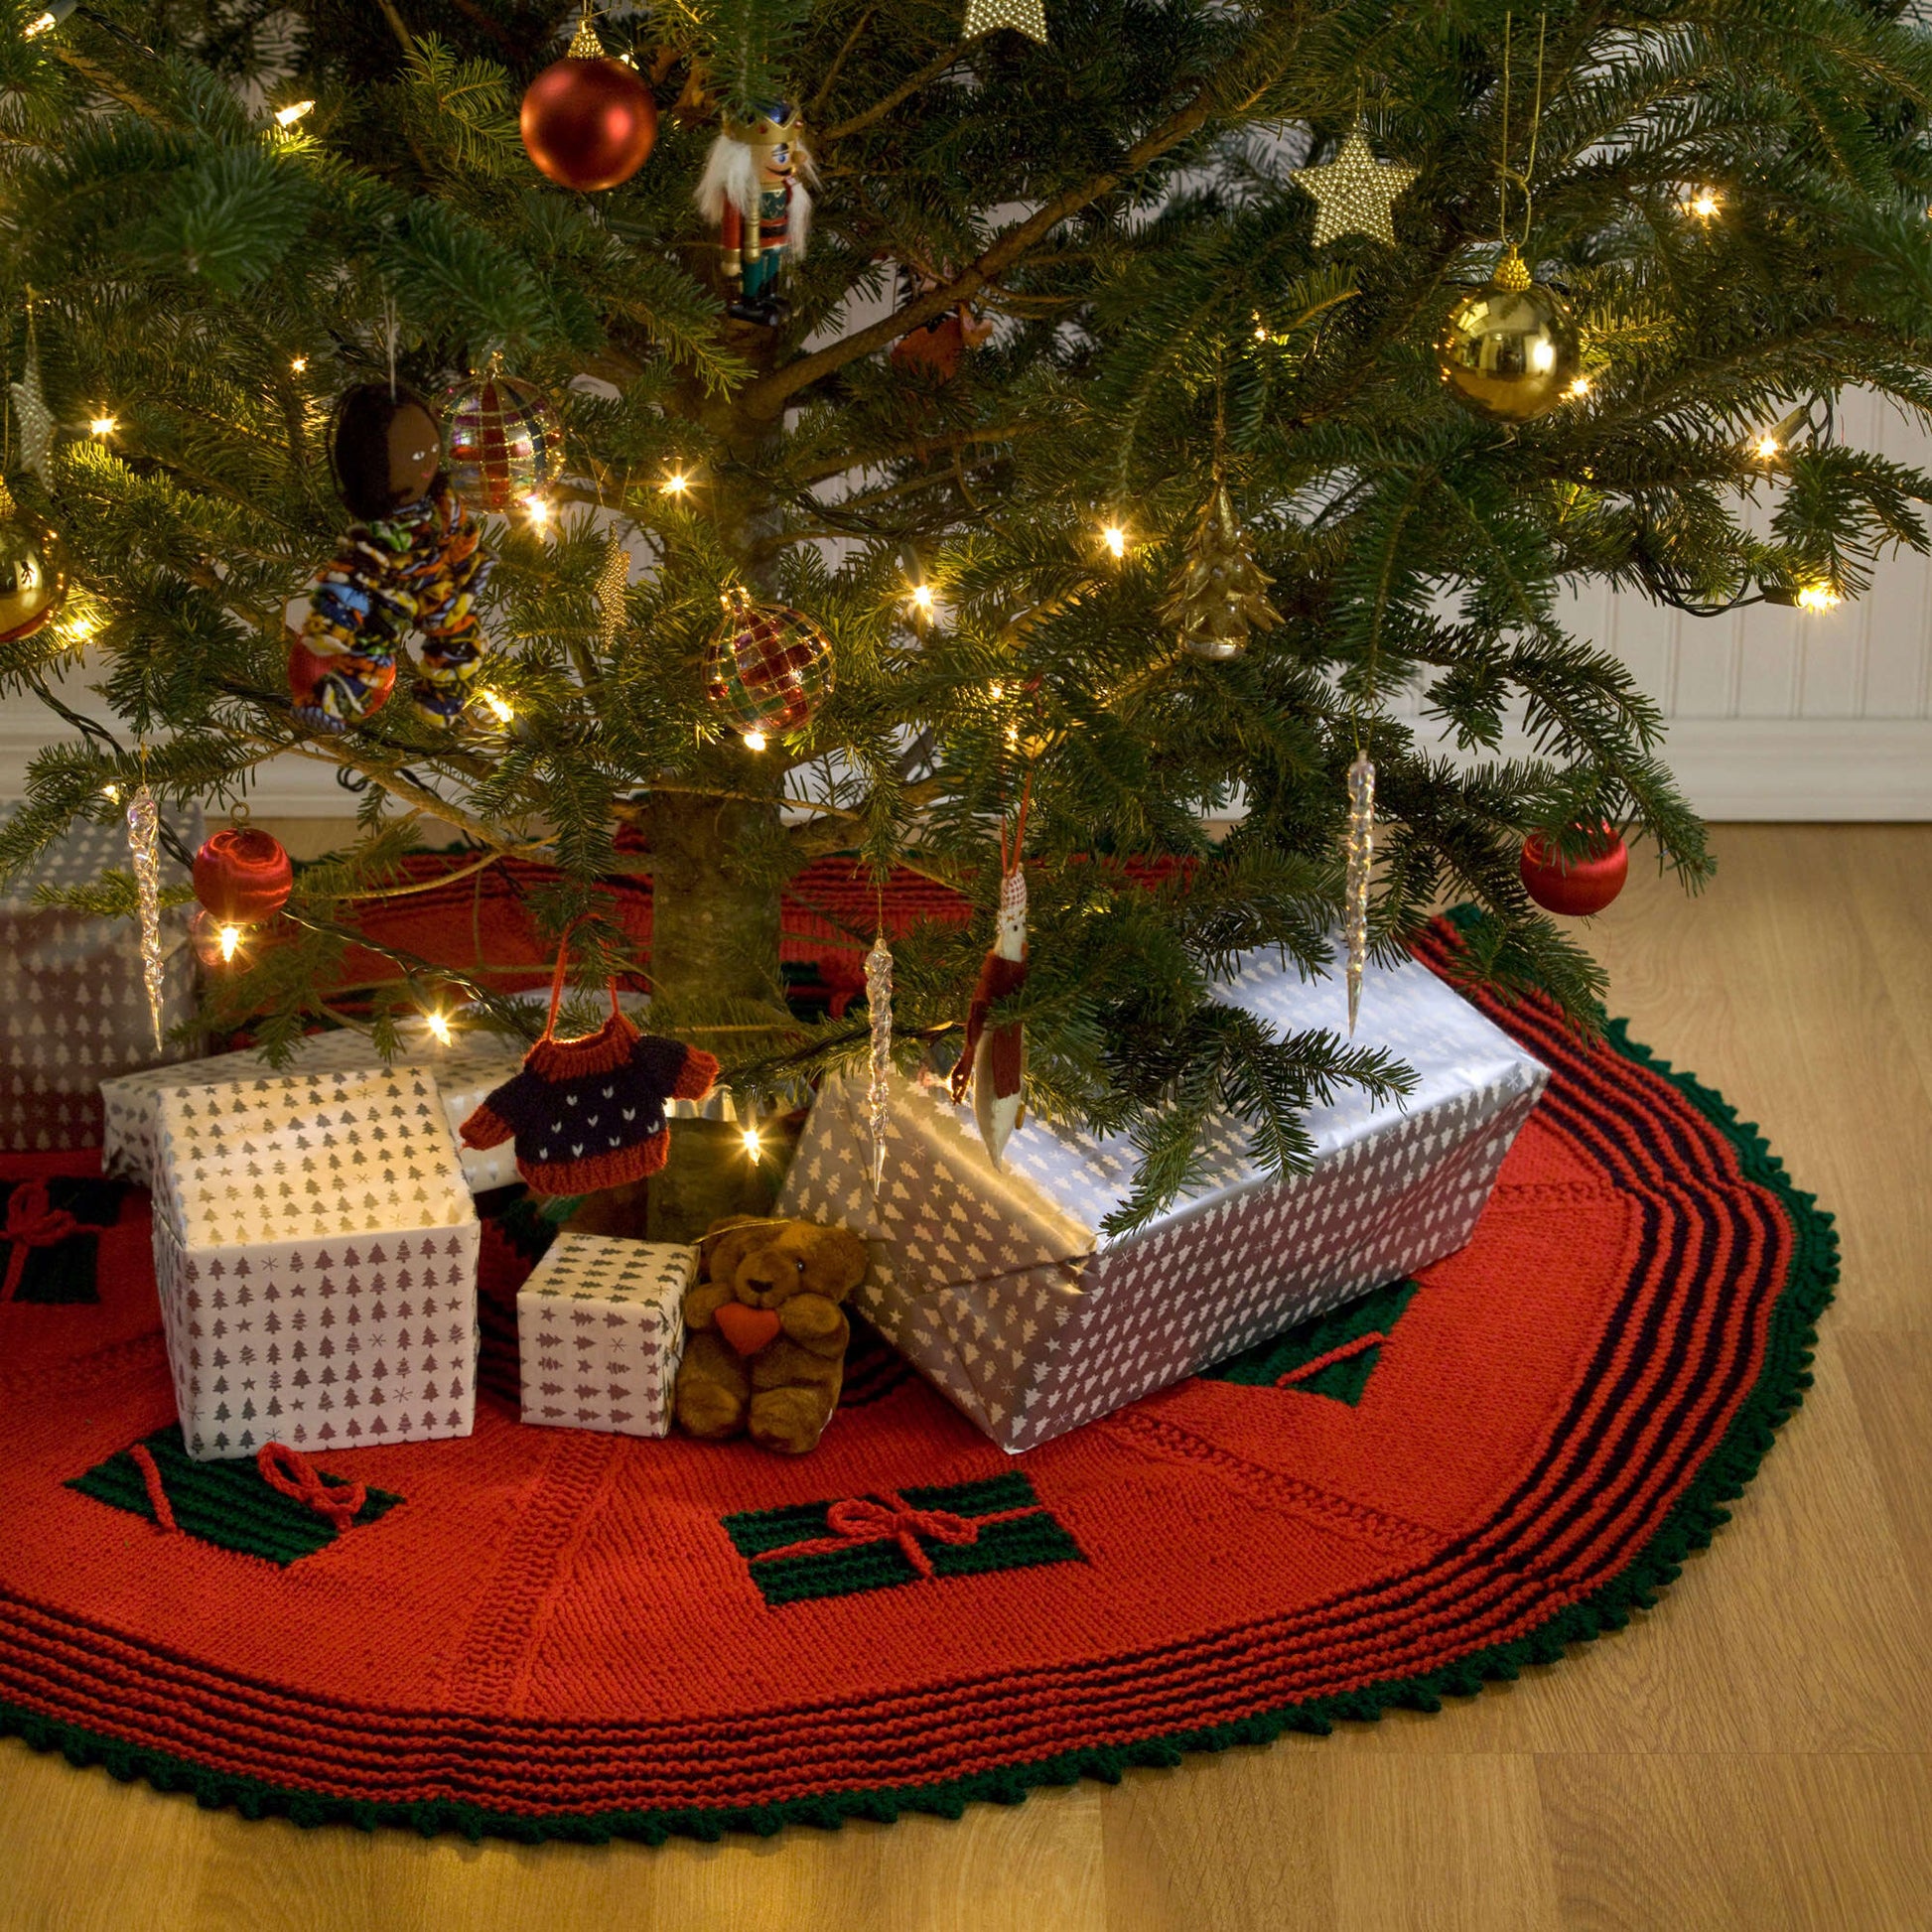 Free Red Heart Knit Gifts Around The Tree Skirt Pattern